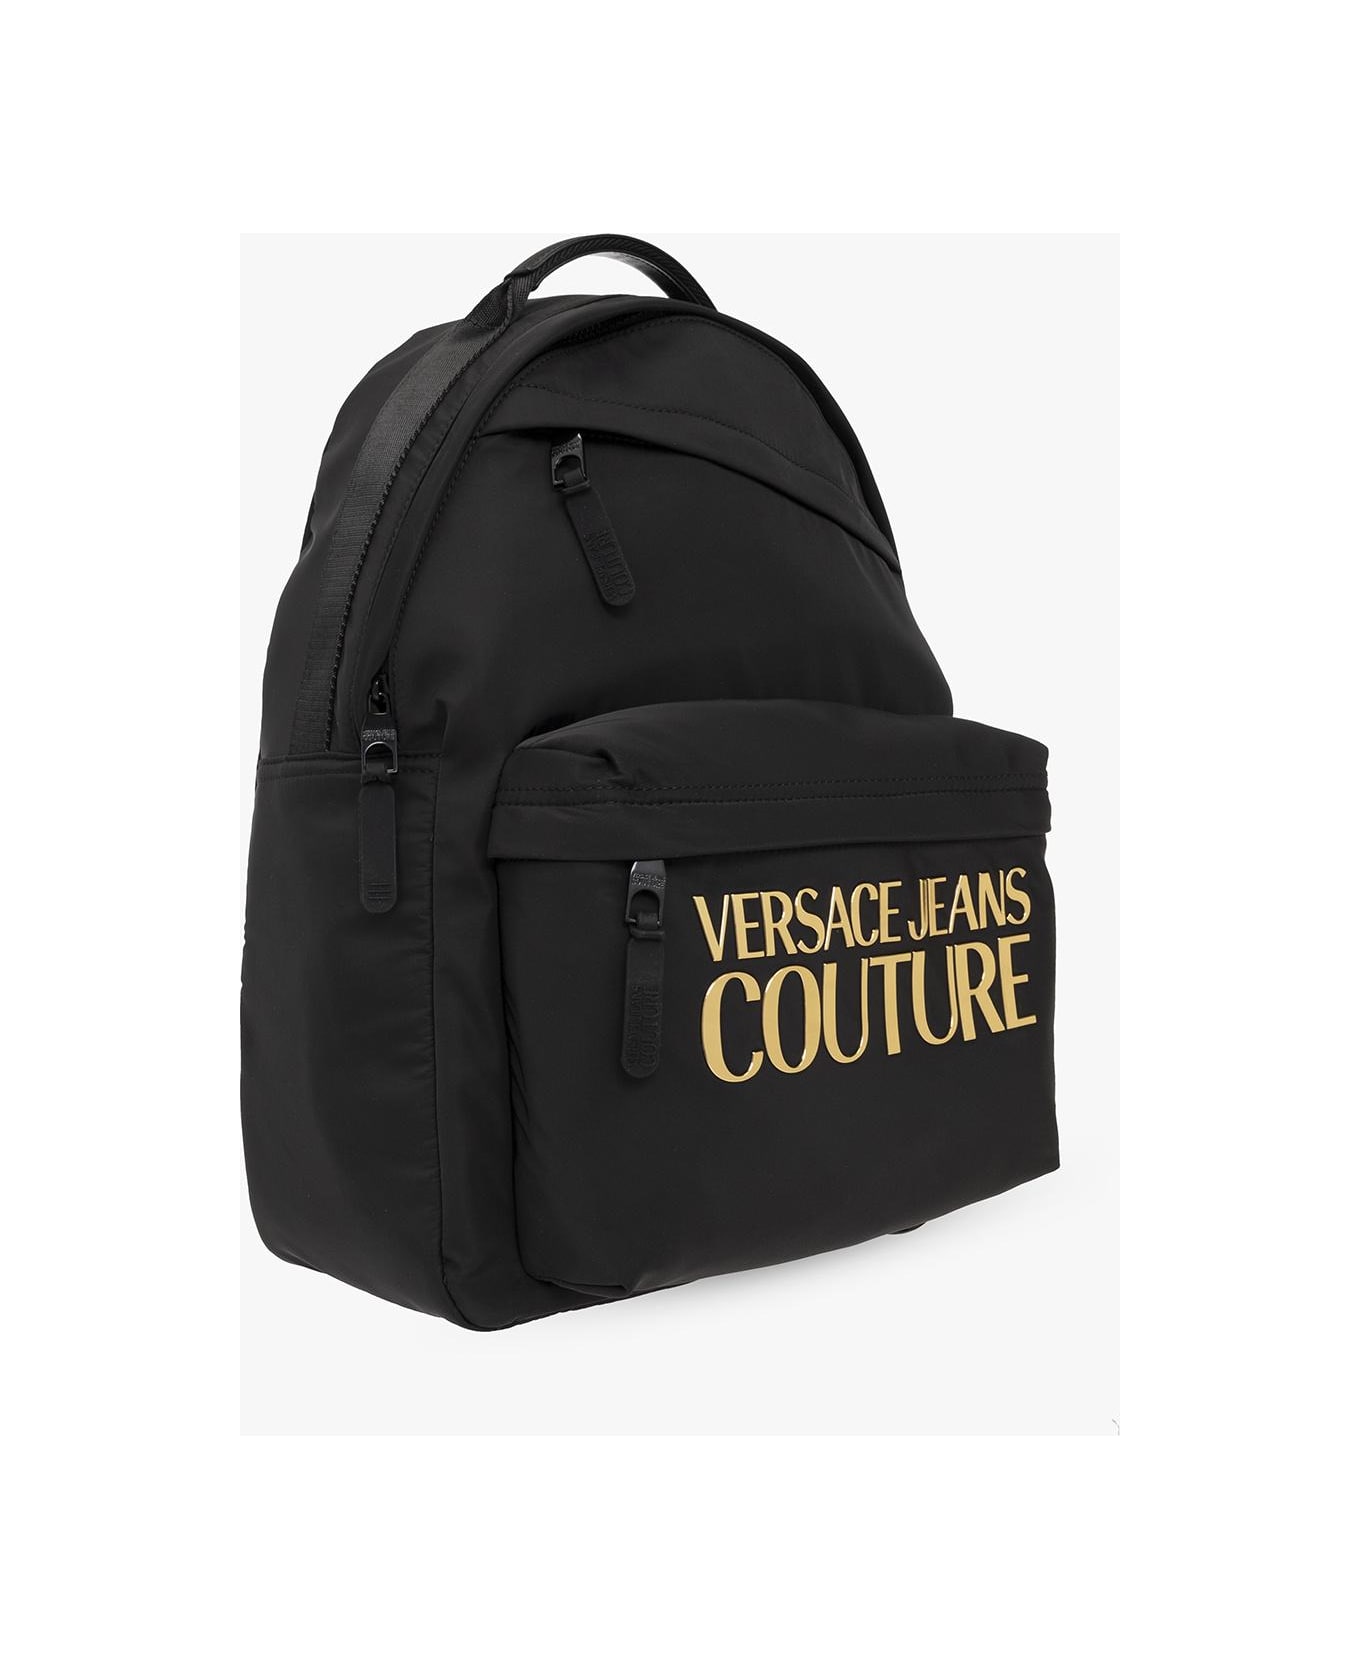 Versace Jeans Couture Bag - BLACK/GOLD バックパック